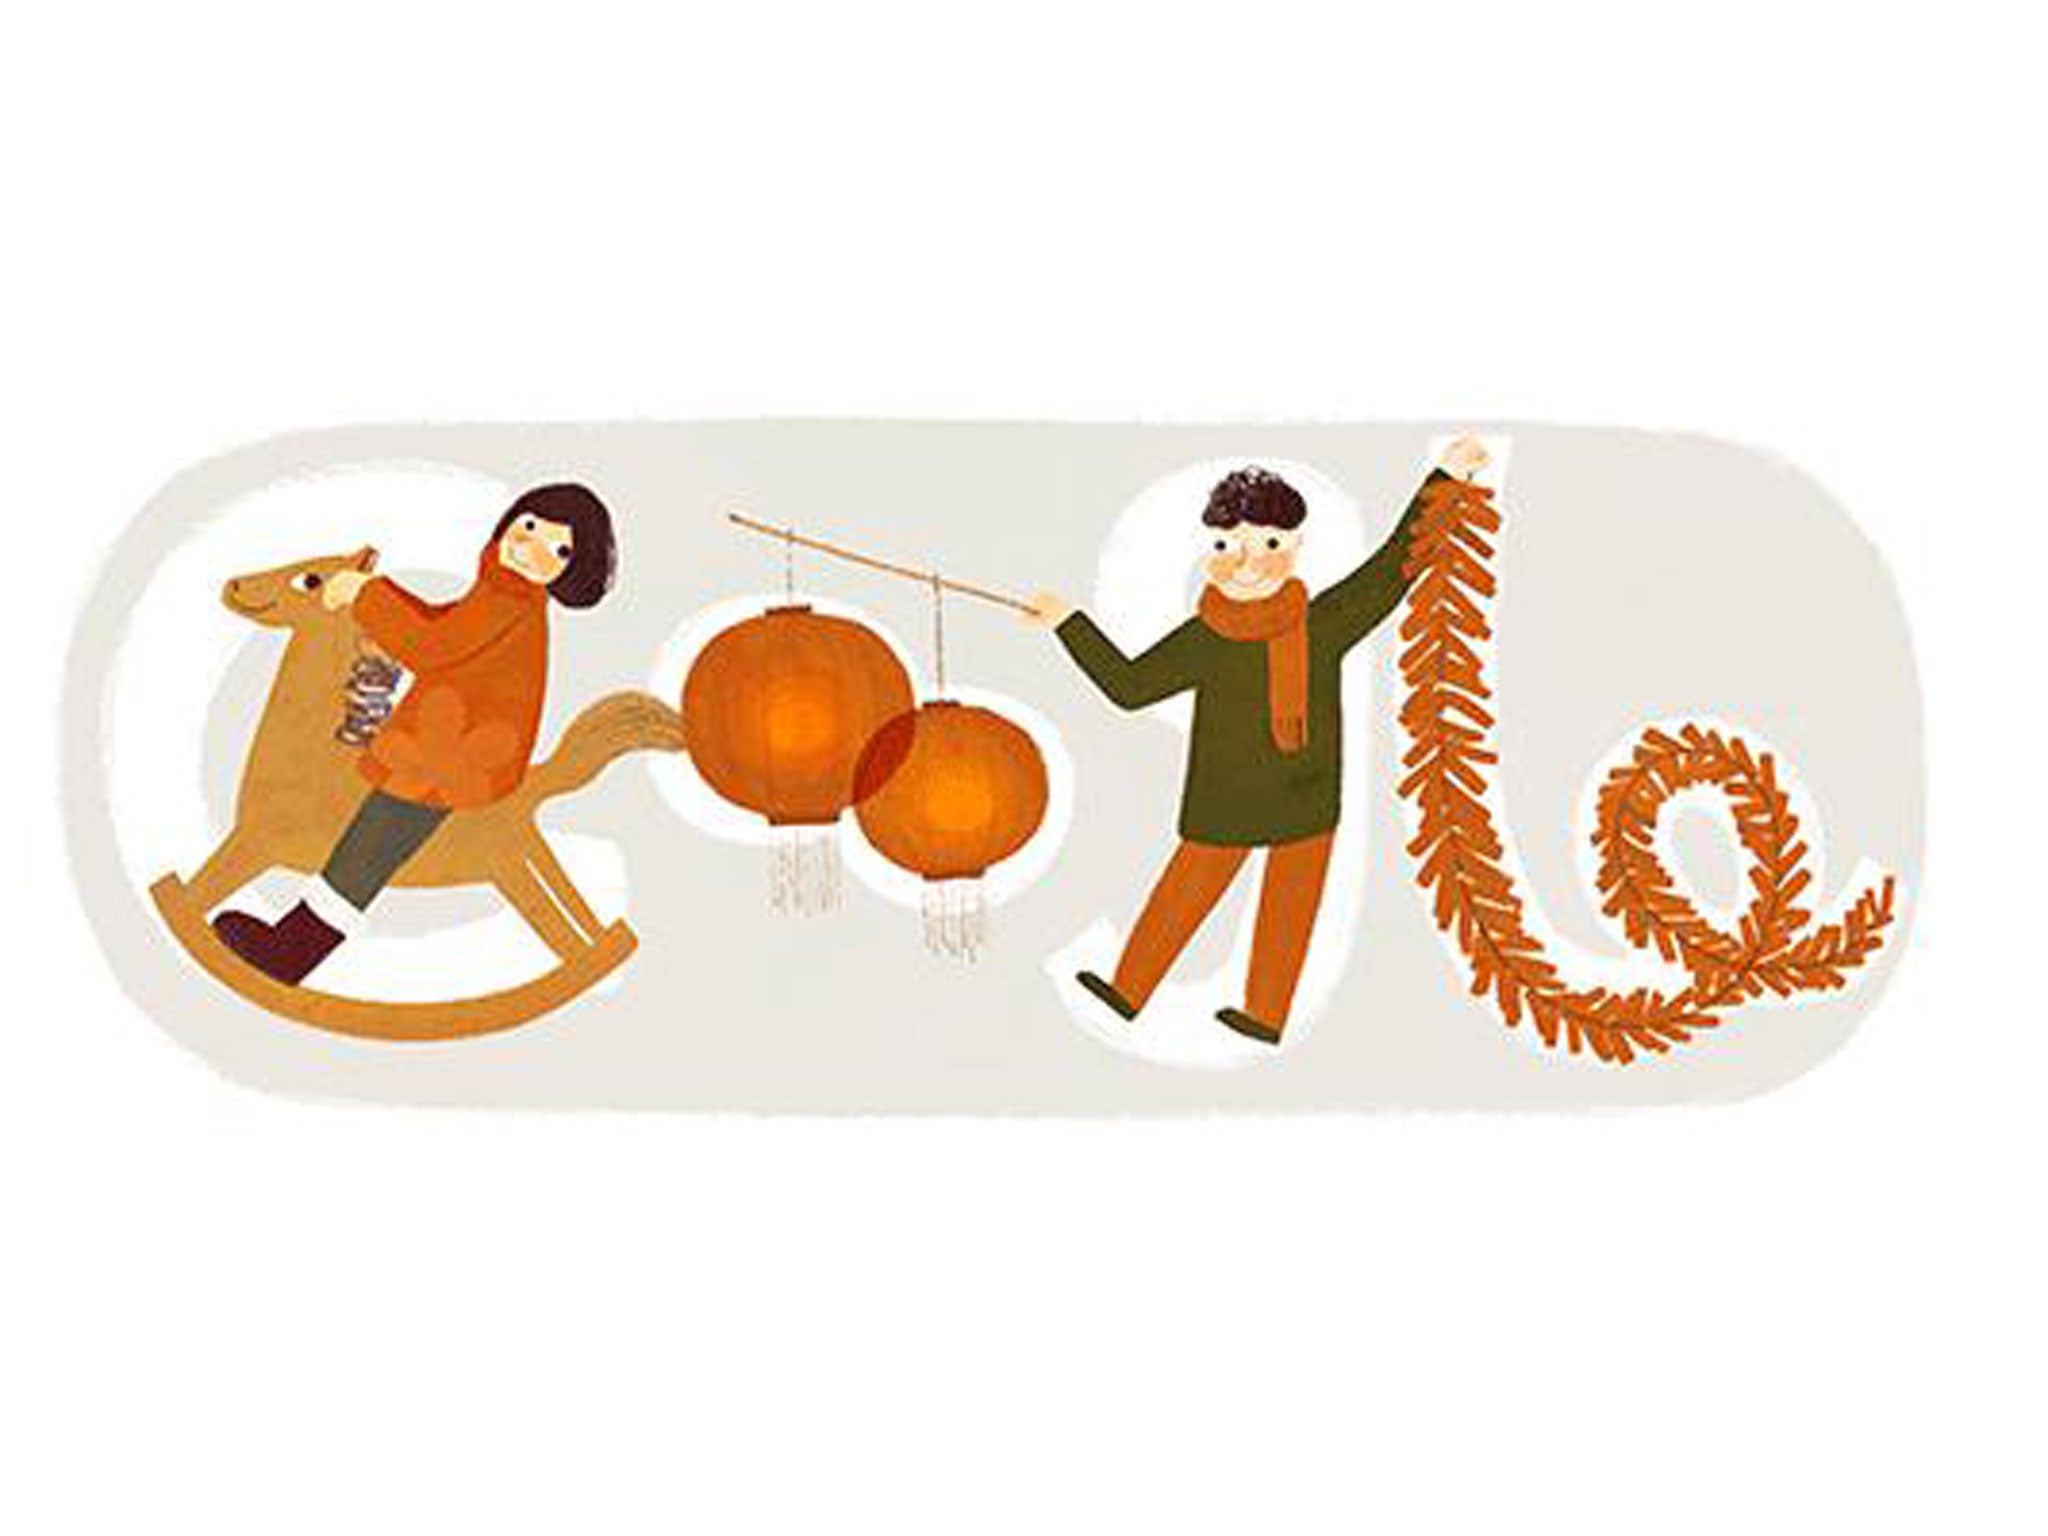 Happy New Year! Chinese New Year has been celebrated with a Google Doodle